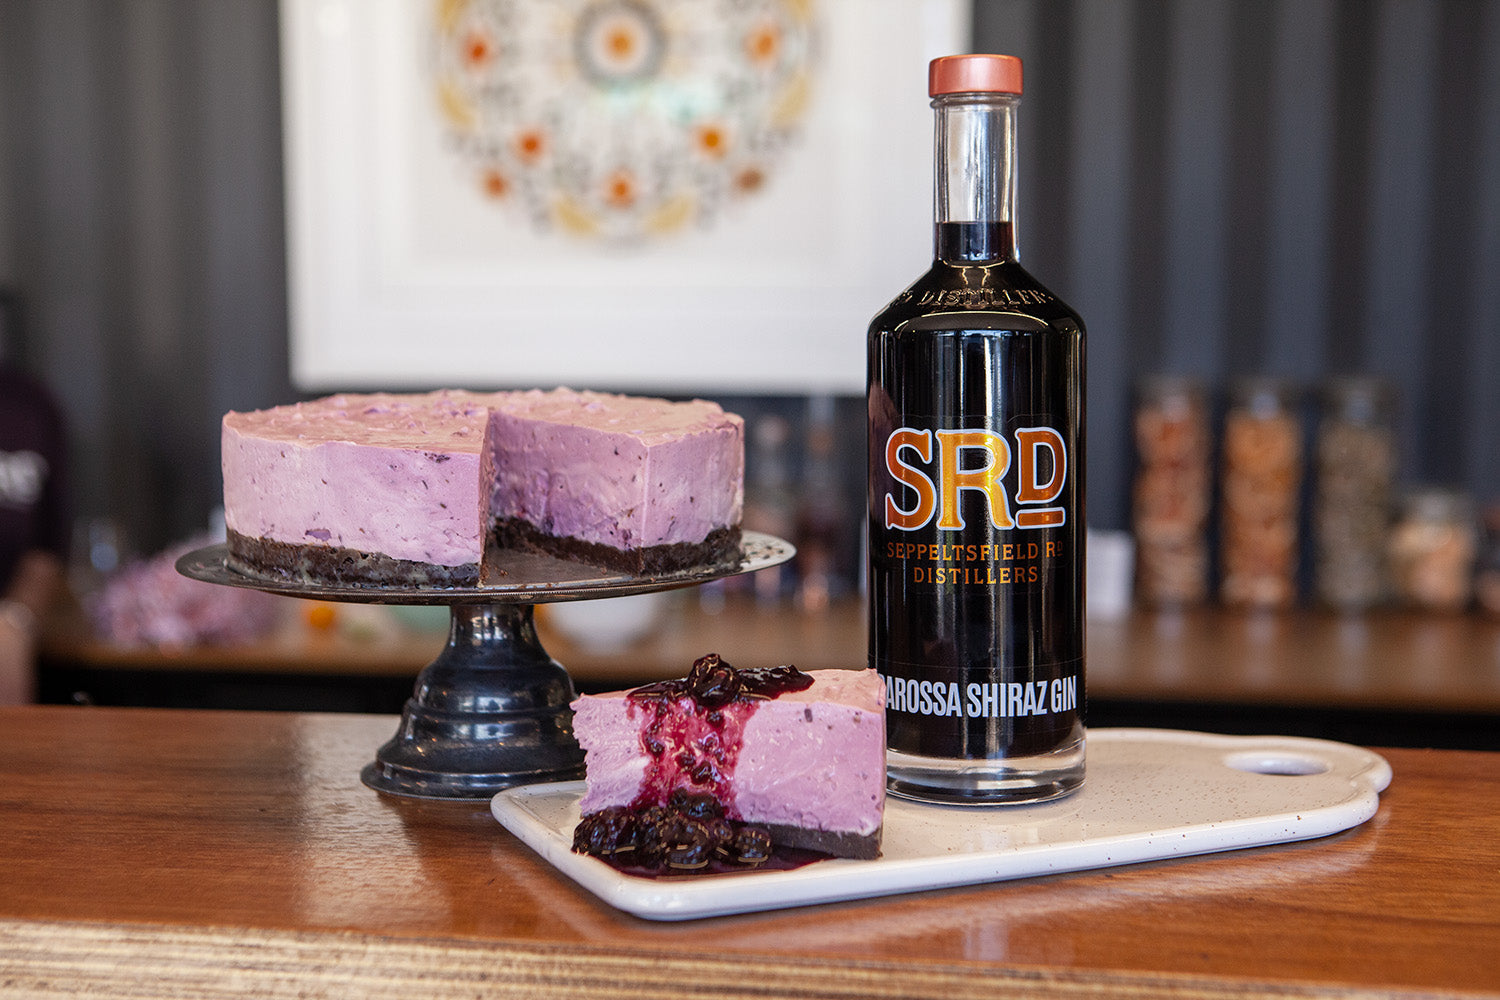 Cooking with SRD Gin